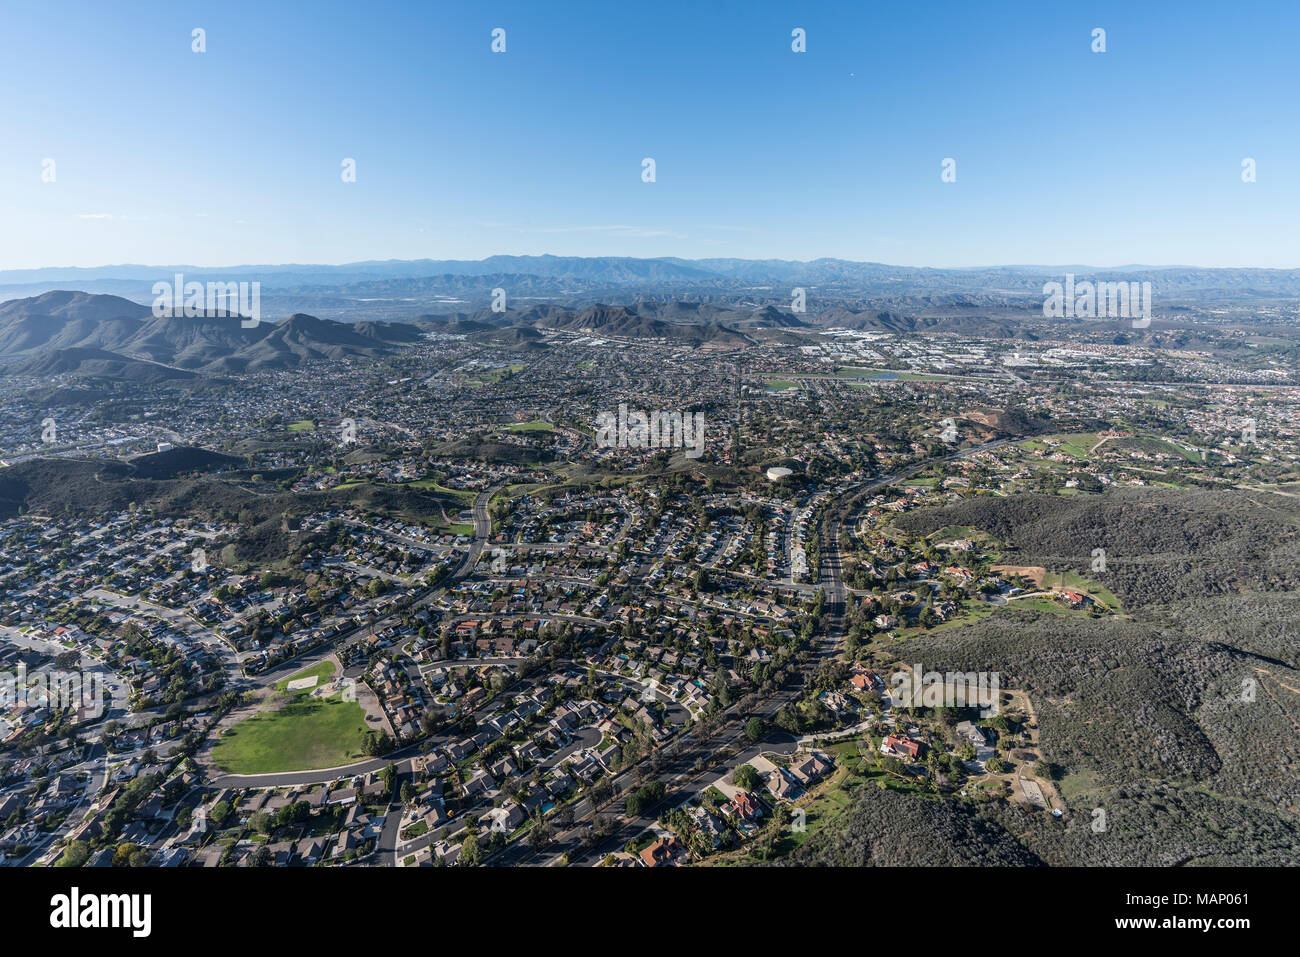 Aerial view of large suburban Newbury Park and Thousand Oaks in Ventura County, California. Stock Photo